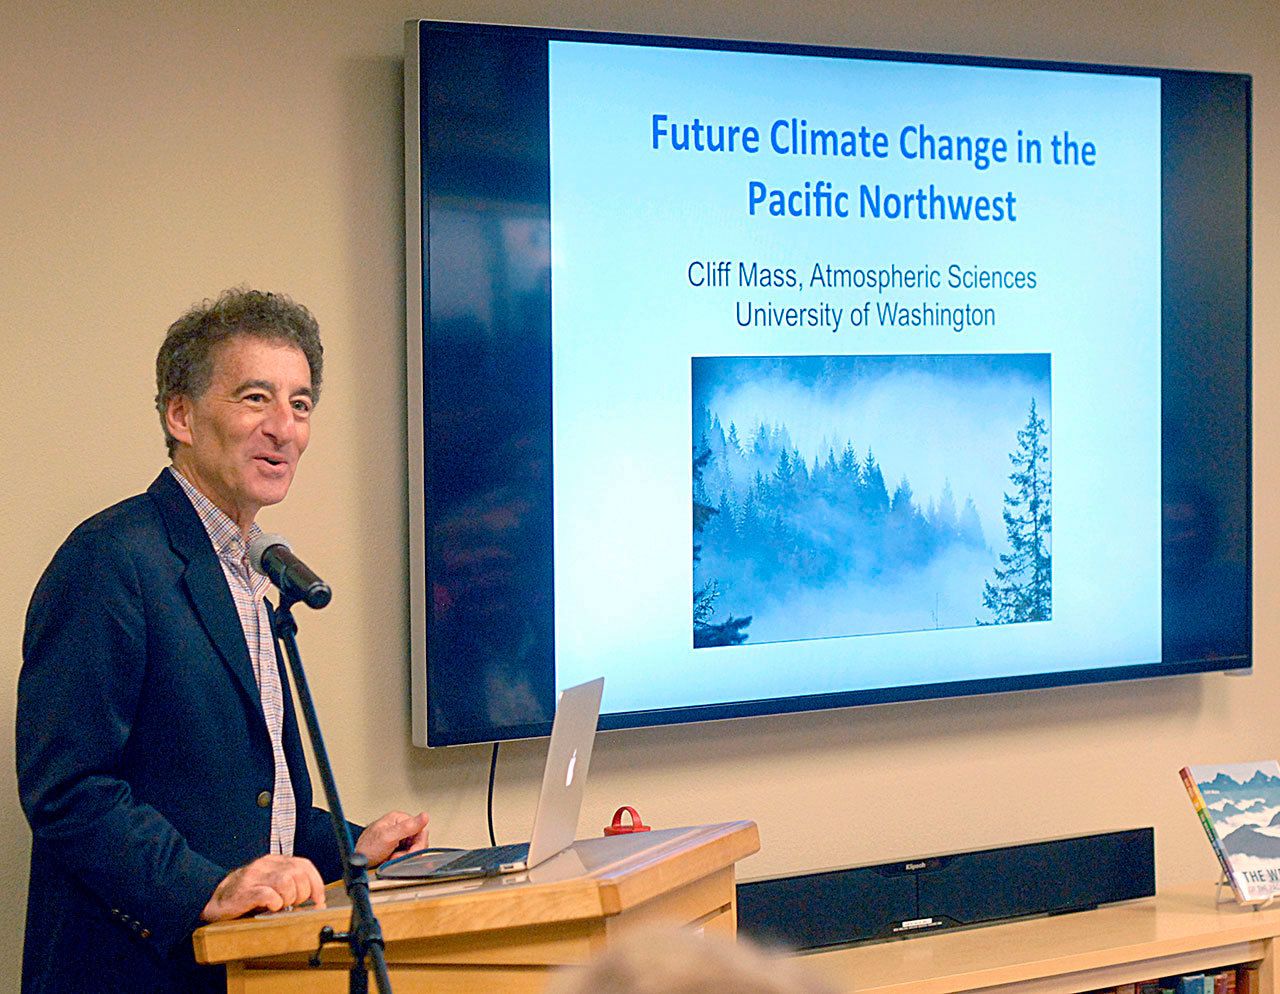 Weather expert: Little climate change effect on Peninsula — so far